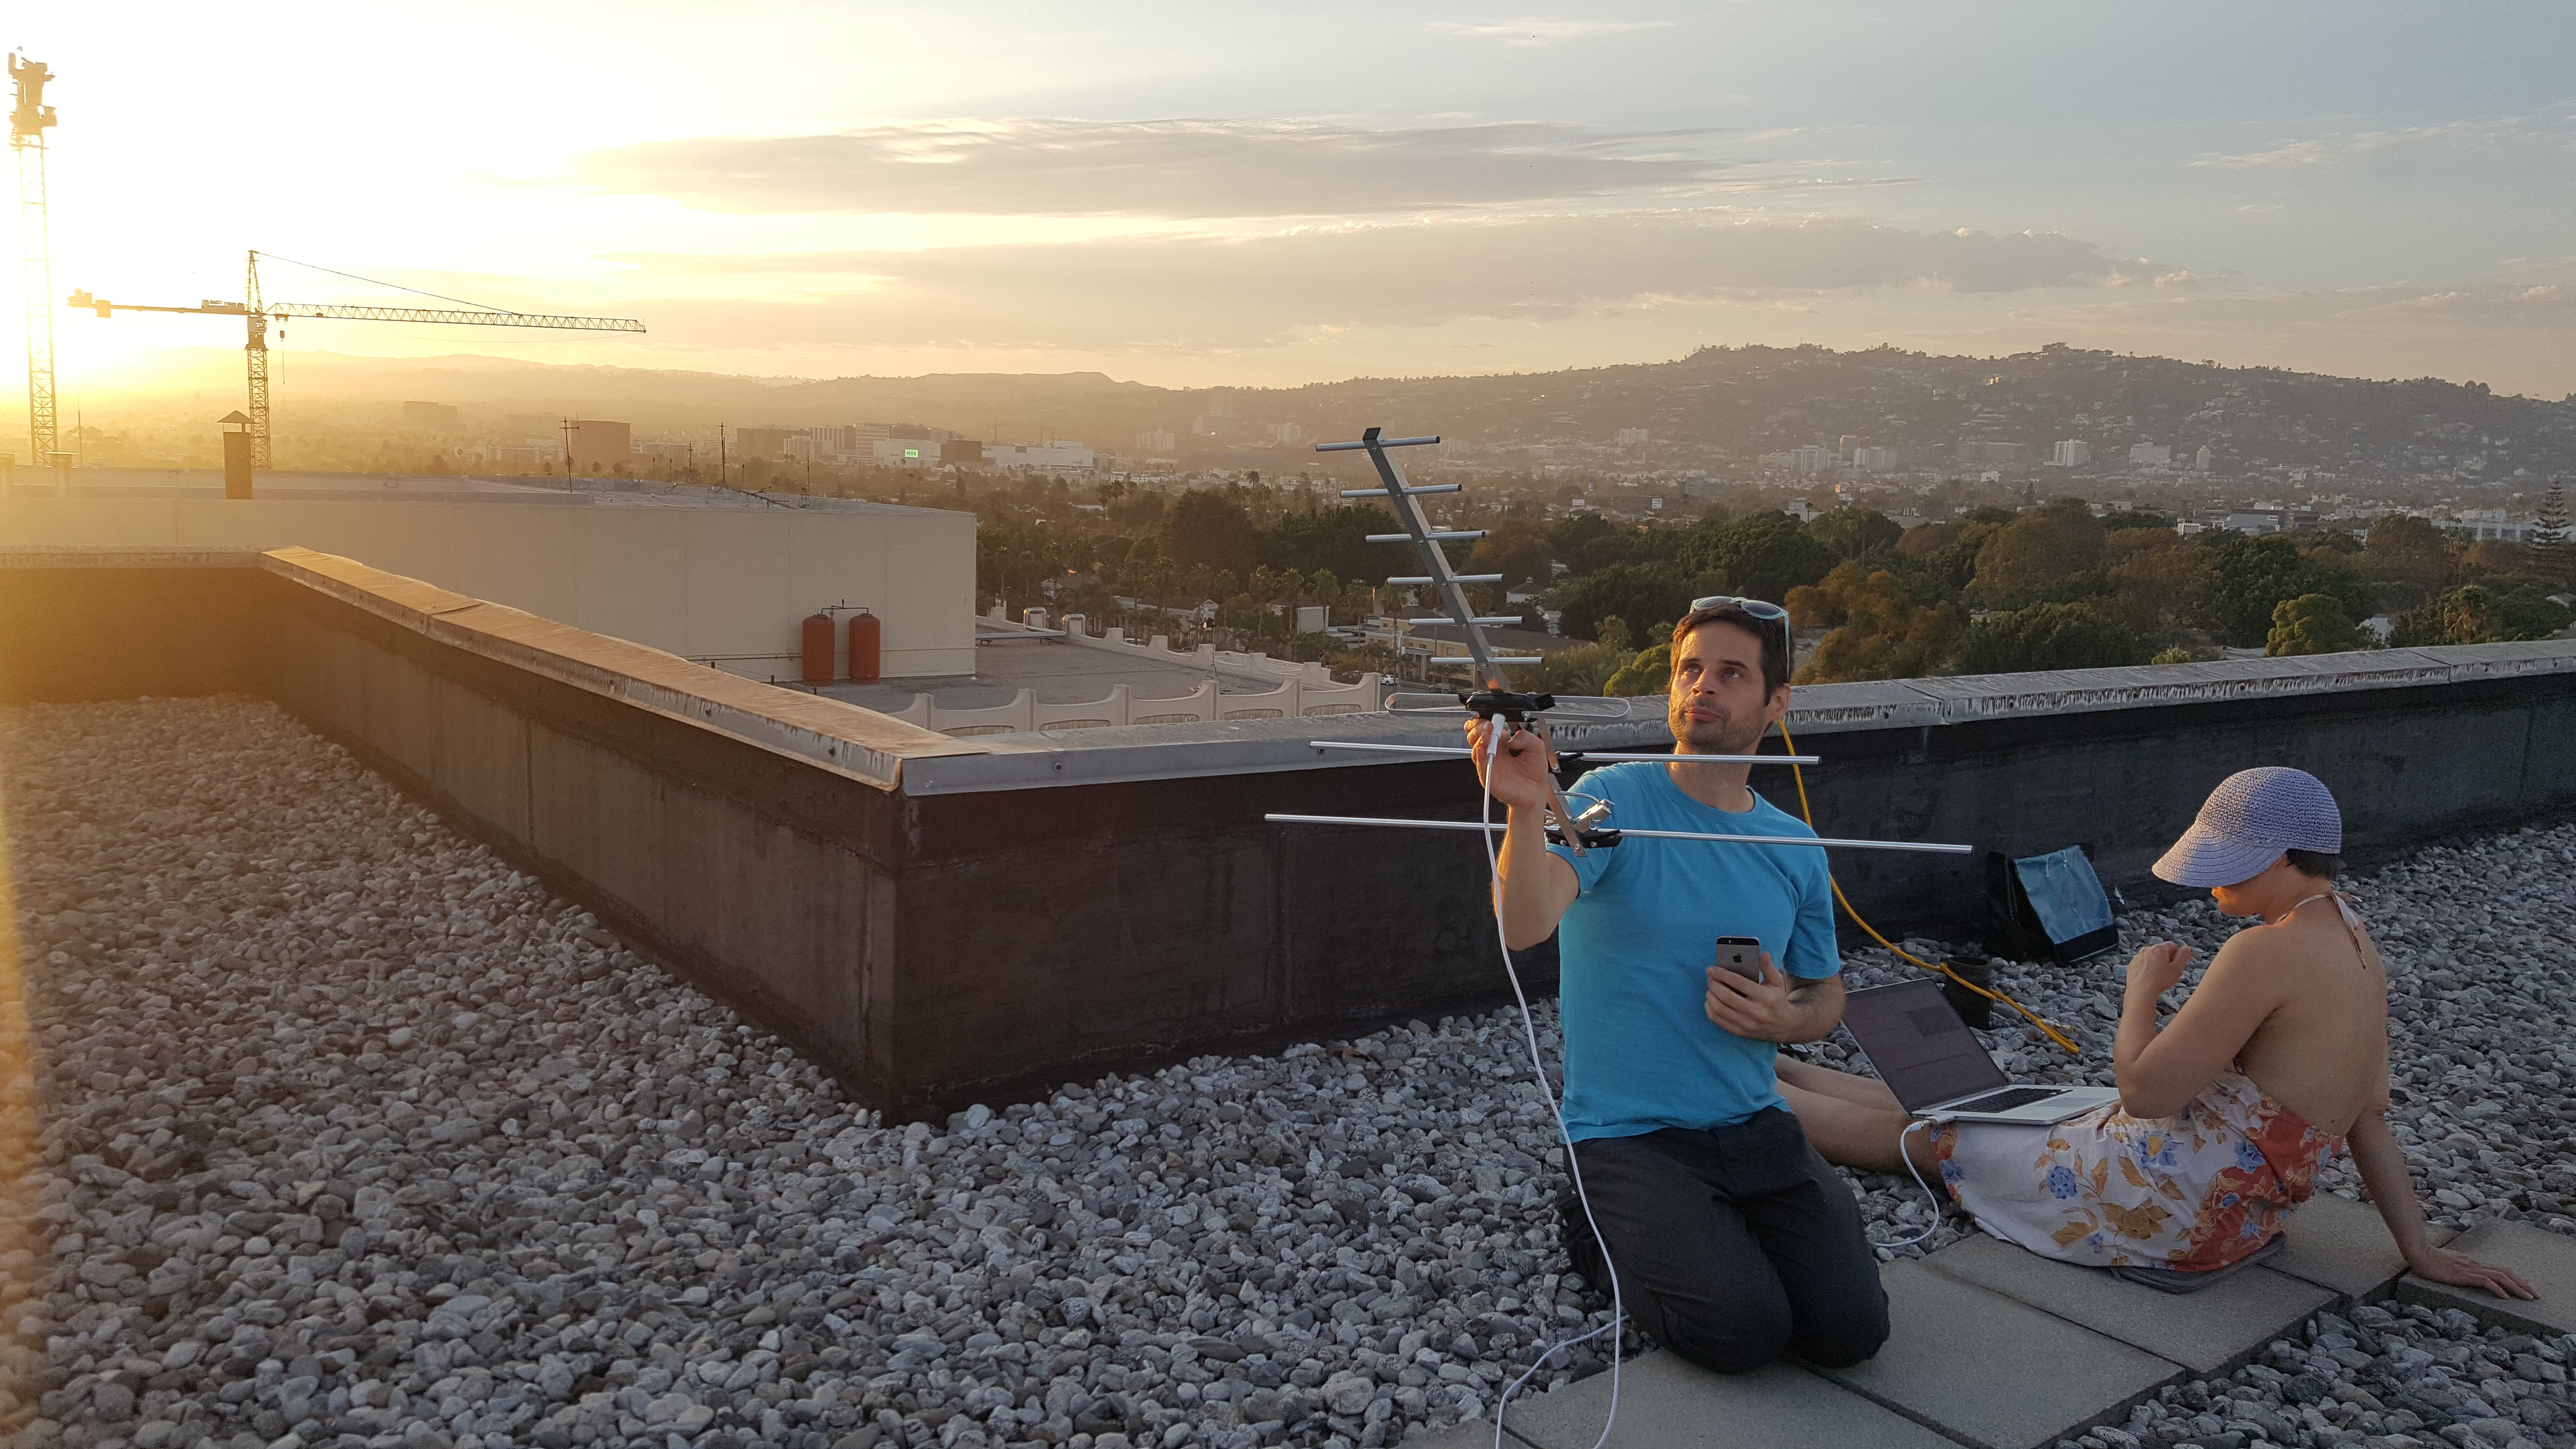 Tracking satellite signals on the roof at LACMA, August 2017. © Kovács/O’Doherty